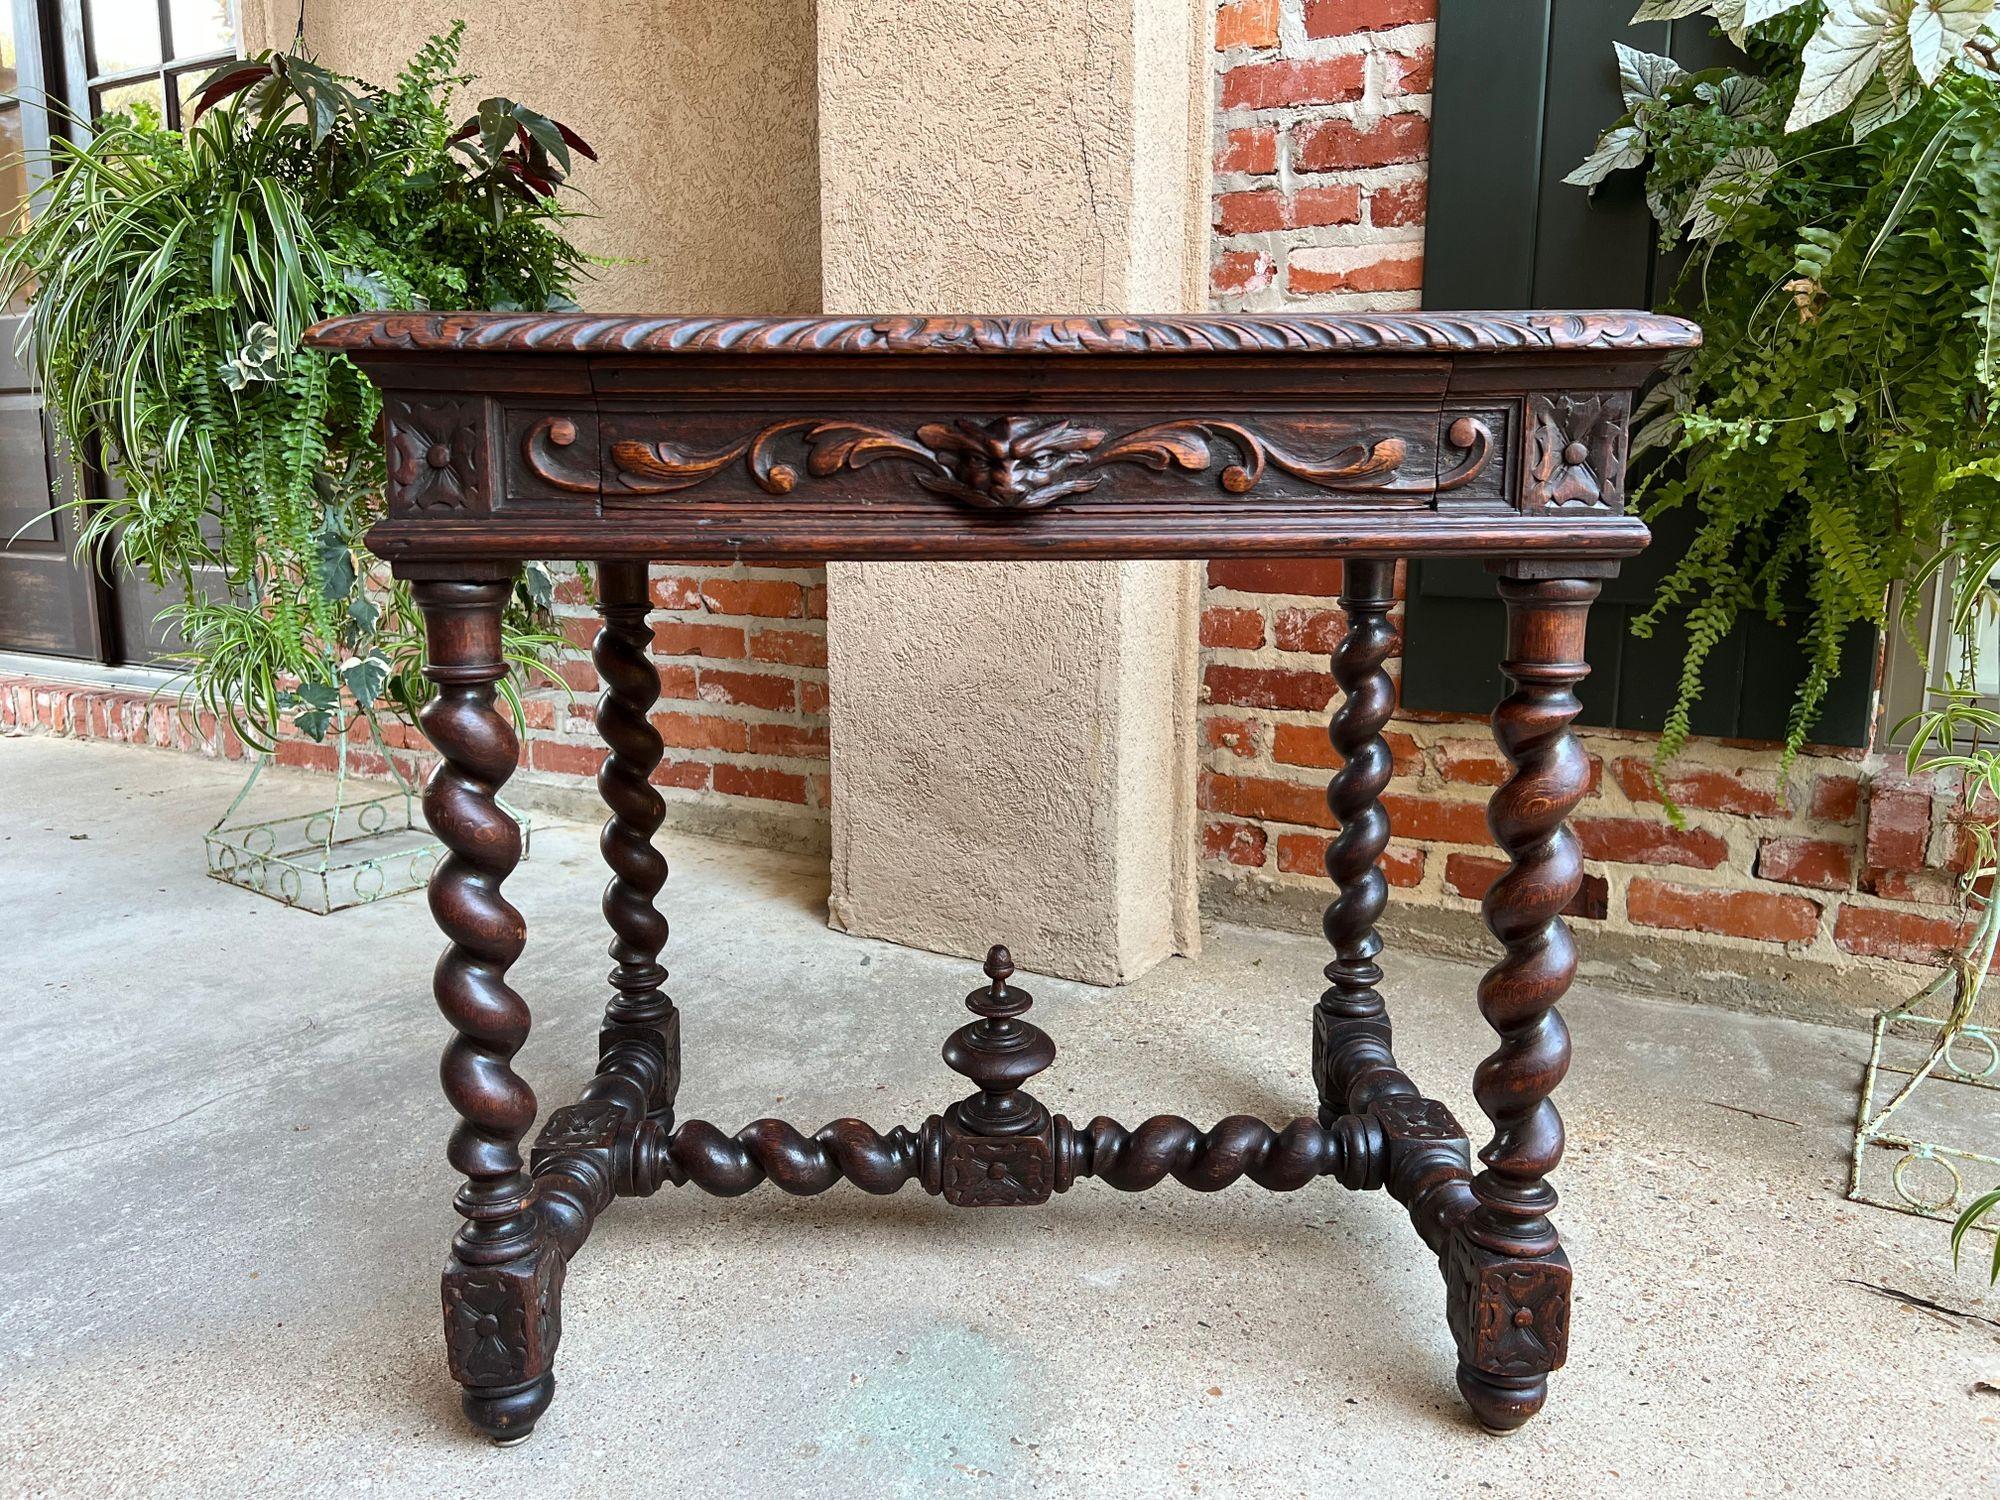 19th century PETITE French Carved Oak sofa table desk Barley Twist Louis XIII design.
 
Direct from France, a lovely antique French writing desk or sofa table in a very small, versatile size with elegant features!!
Large, lovely barley twist legs